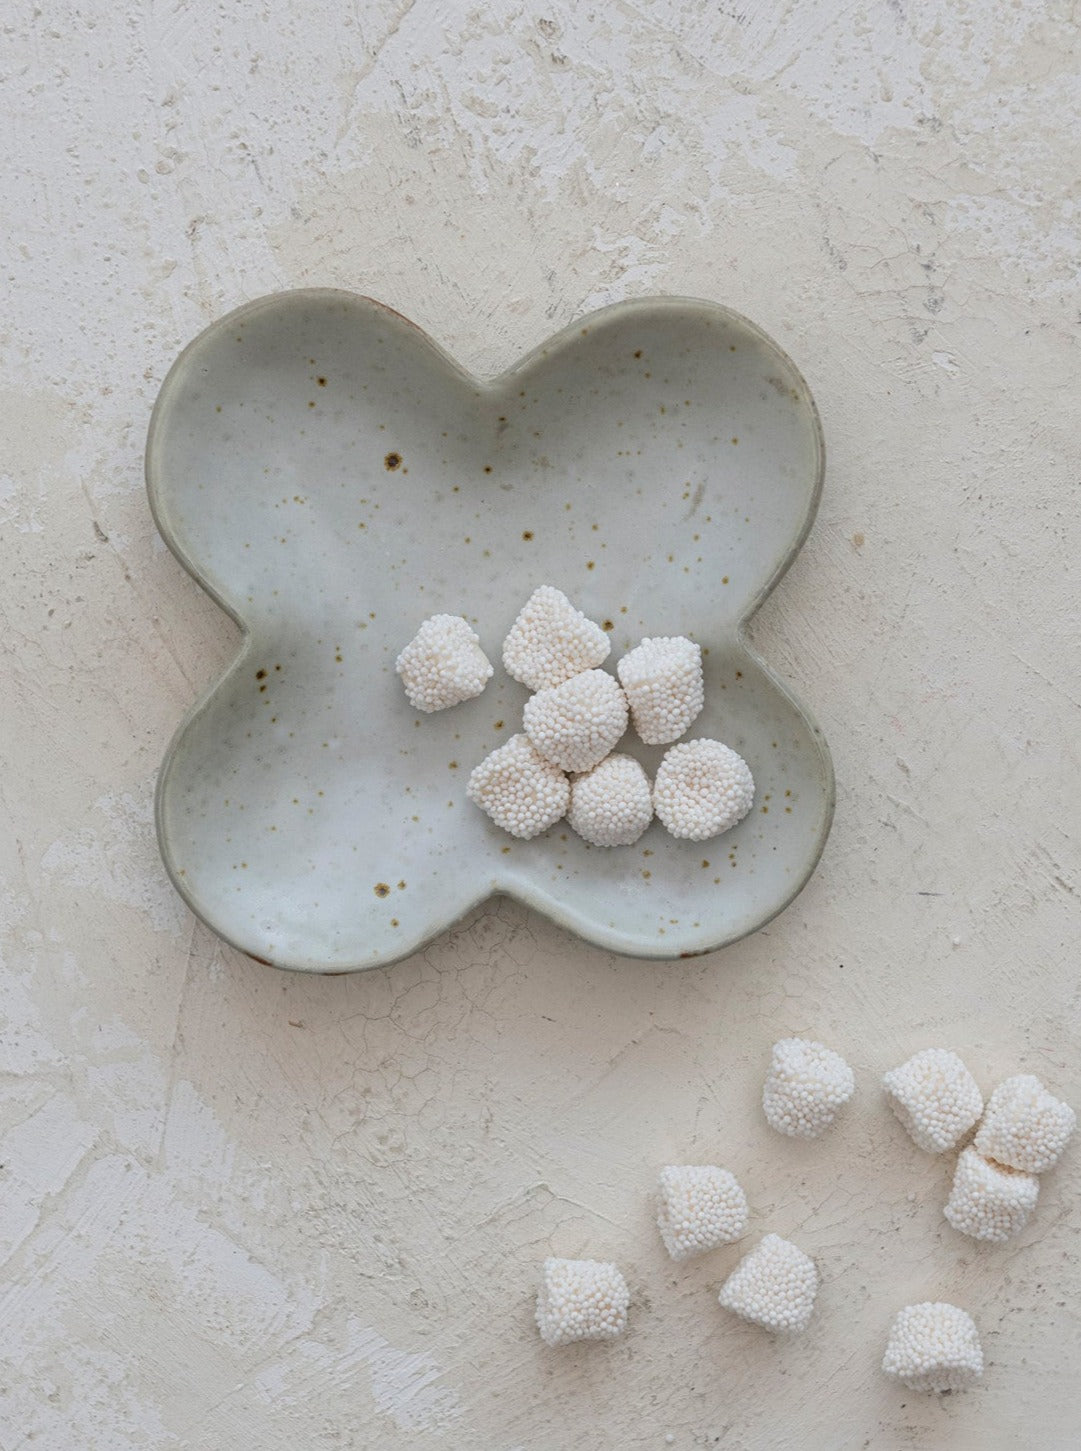 Clover Shaped Dish